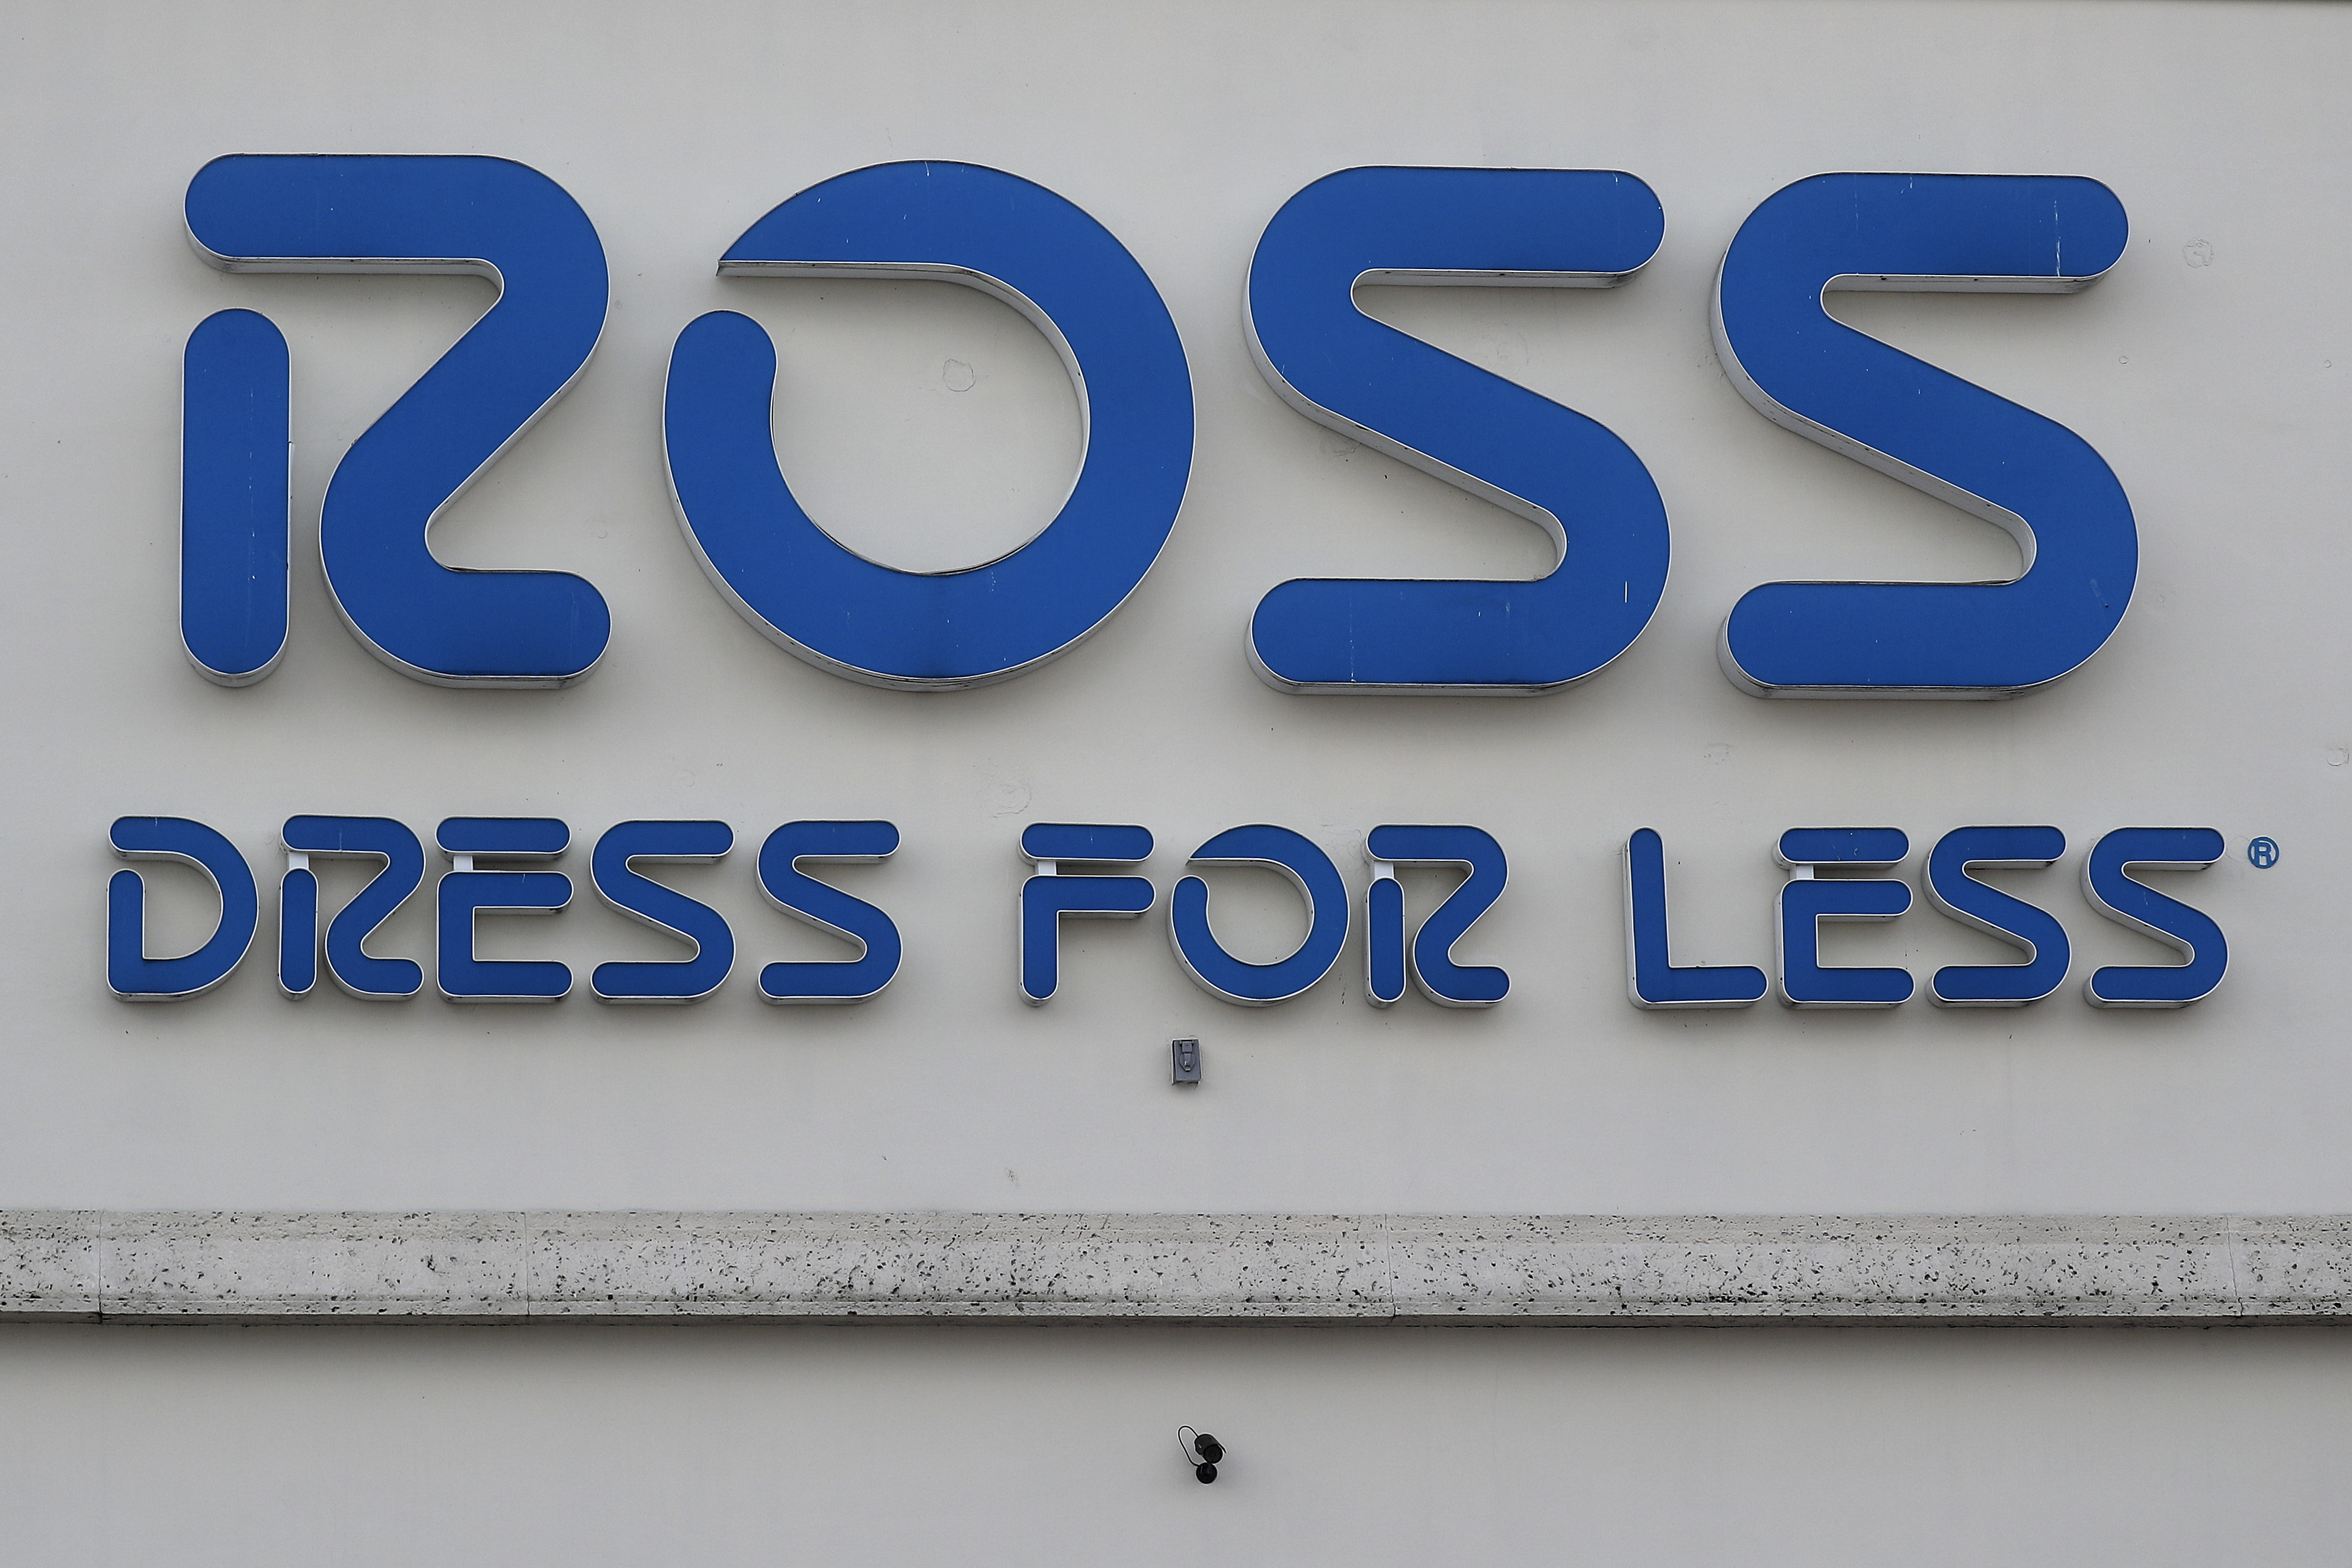 A Ross store logo is pictured on a building in North Miami, Florida